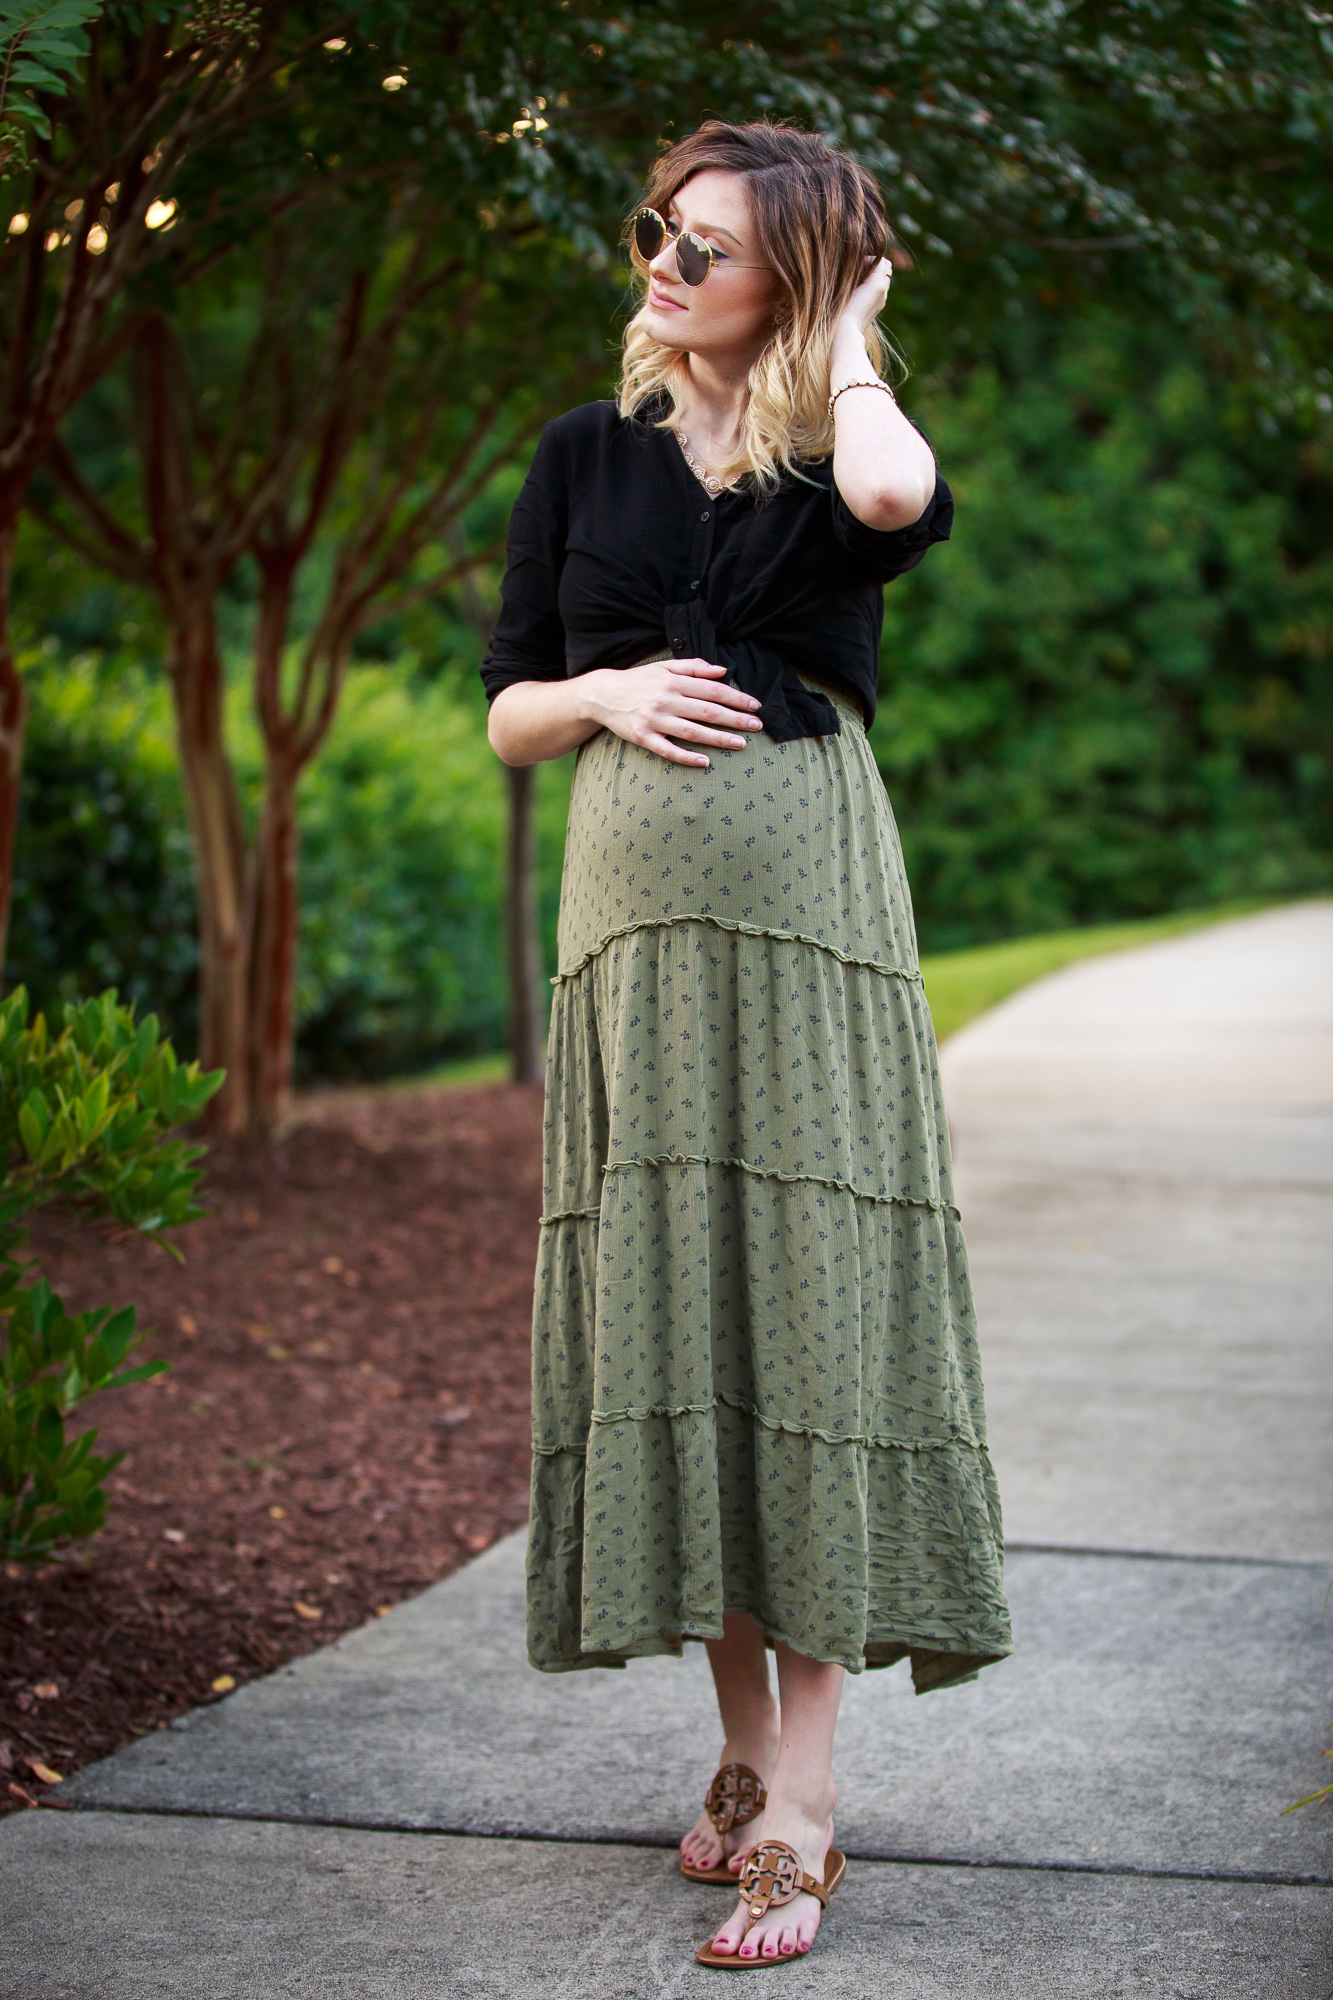 Maternity Style outfit inspiration by North Carolina fashion and lifestyle blogger Jessica Linn from Linn Style. Olive green maxi dress from Target, black button up blouse from Forever21, Necklace from Francesca's, and Tory Burch sandals